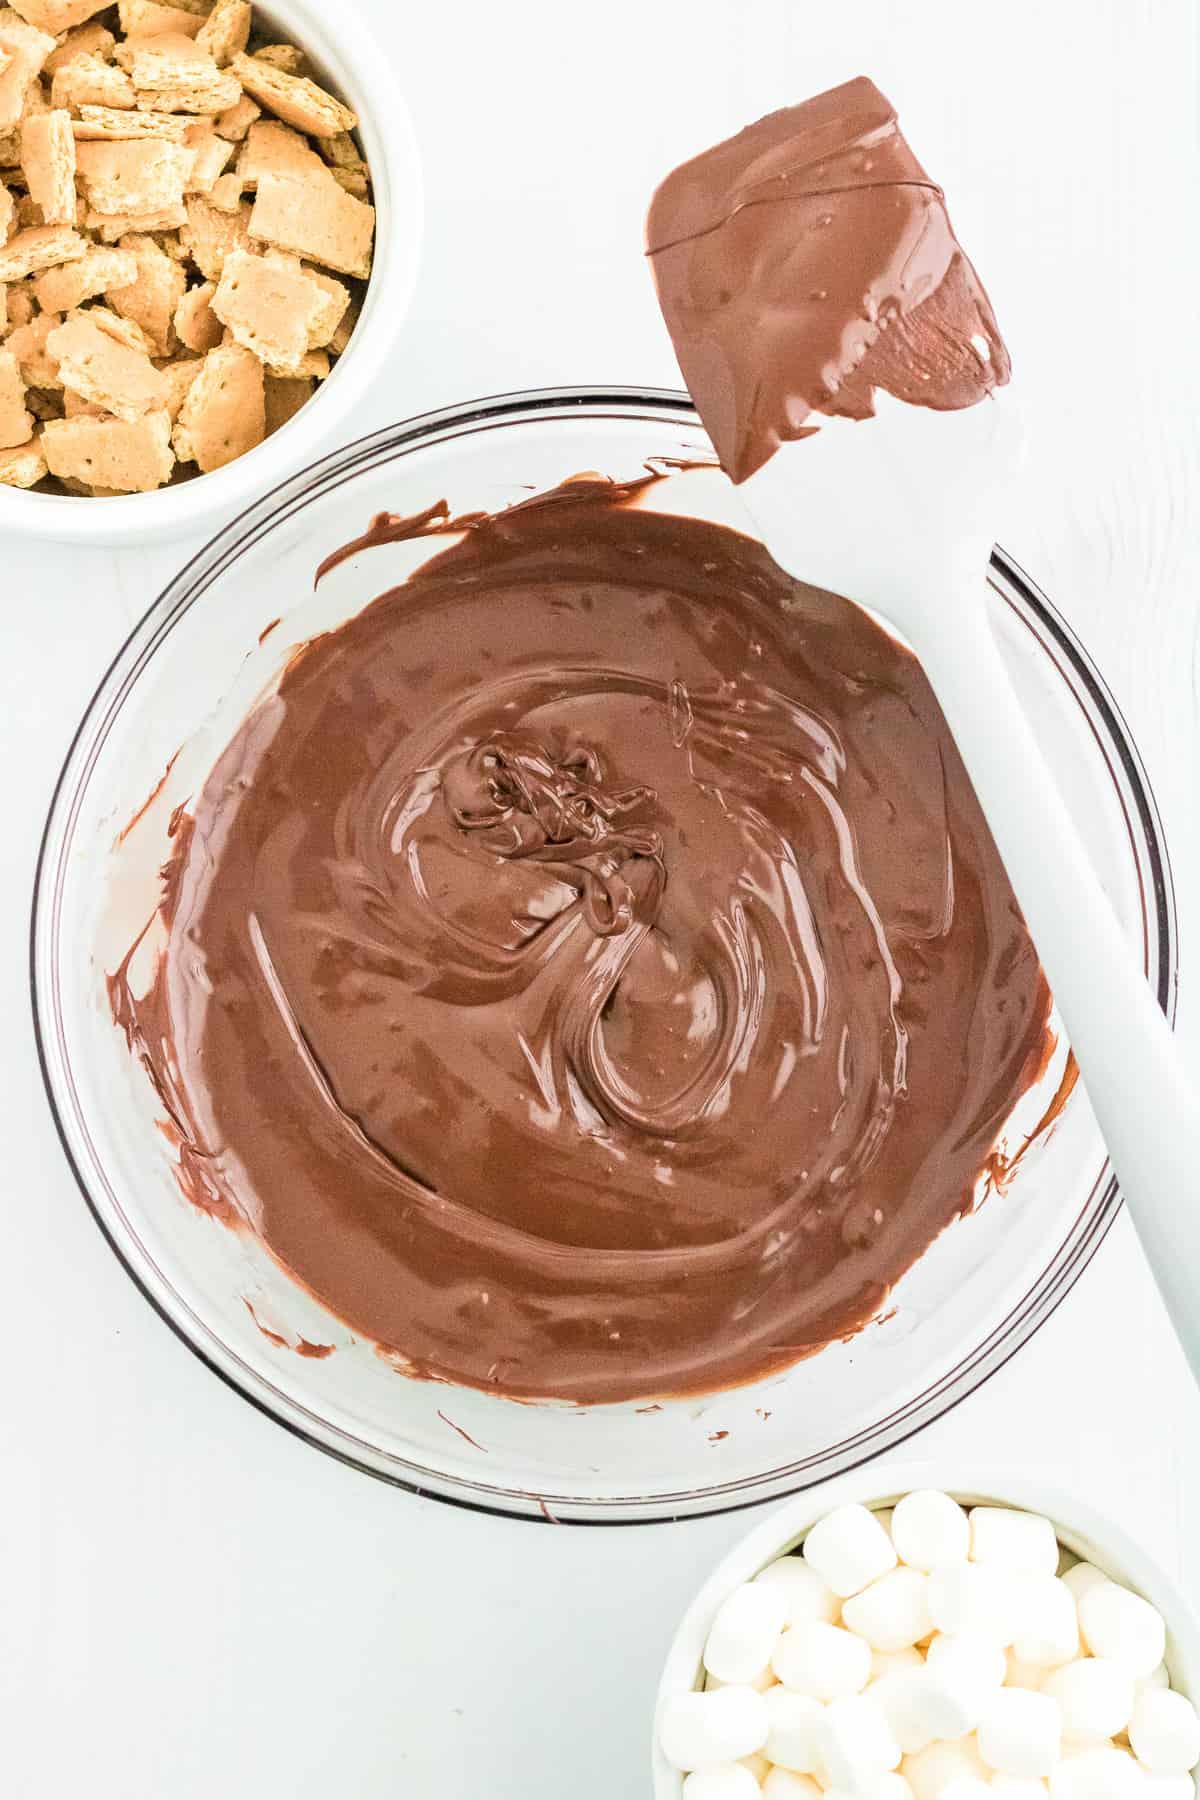 Melt the Chocolate until its Creamy